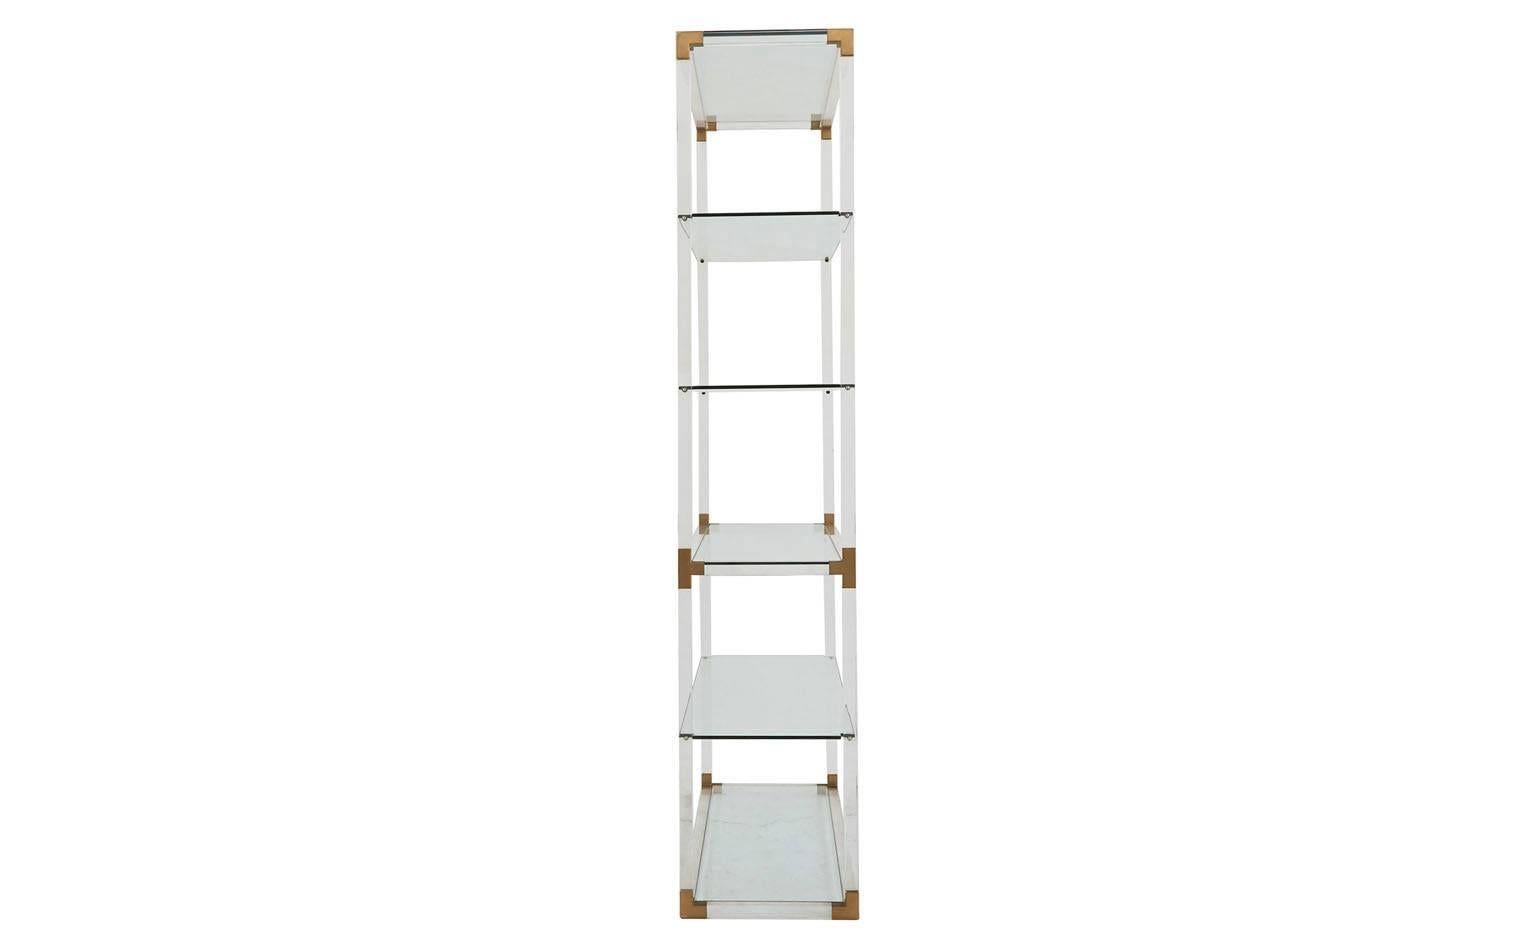 Five glass shelves
Lucite frame with brass detail
Mid-20th century
Barcelona.
Measures: 47'W x 16'D x 78.5'H